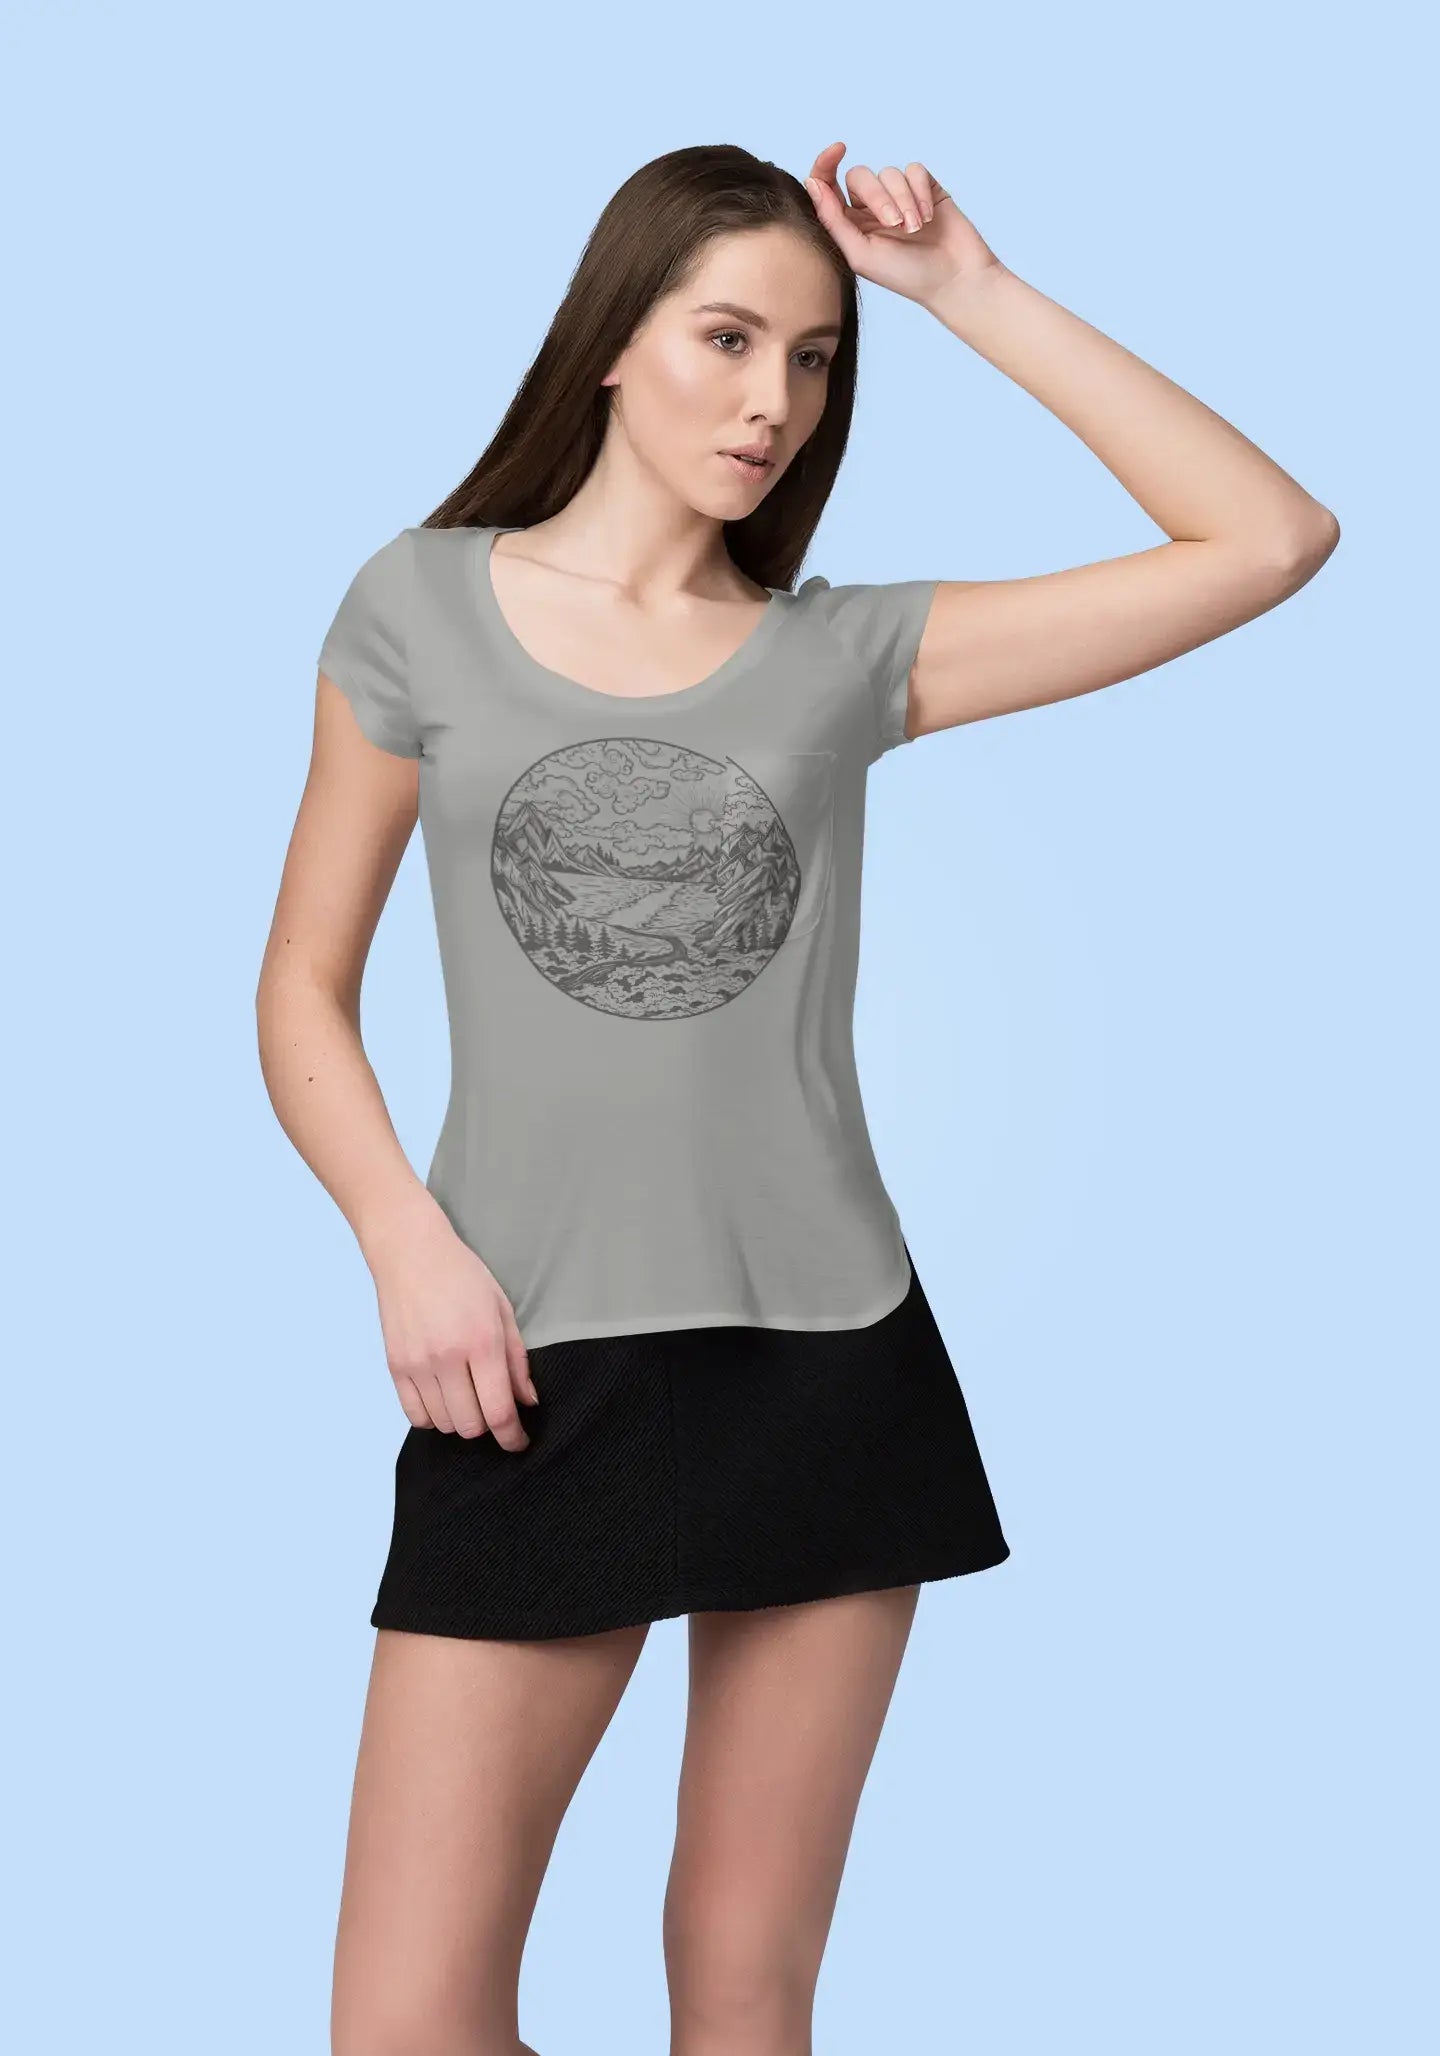 ULTRABASIC - Graphic Printed Women's River Mountain and Forest T-Shirt Deep Black